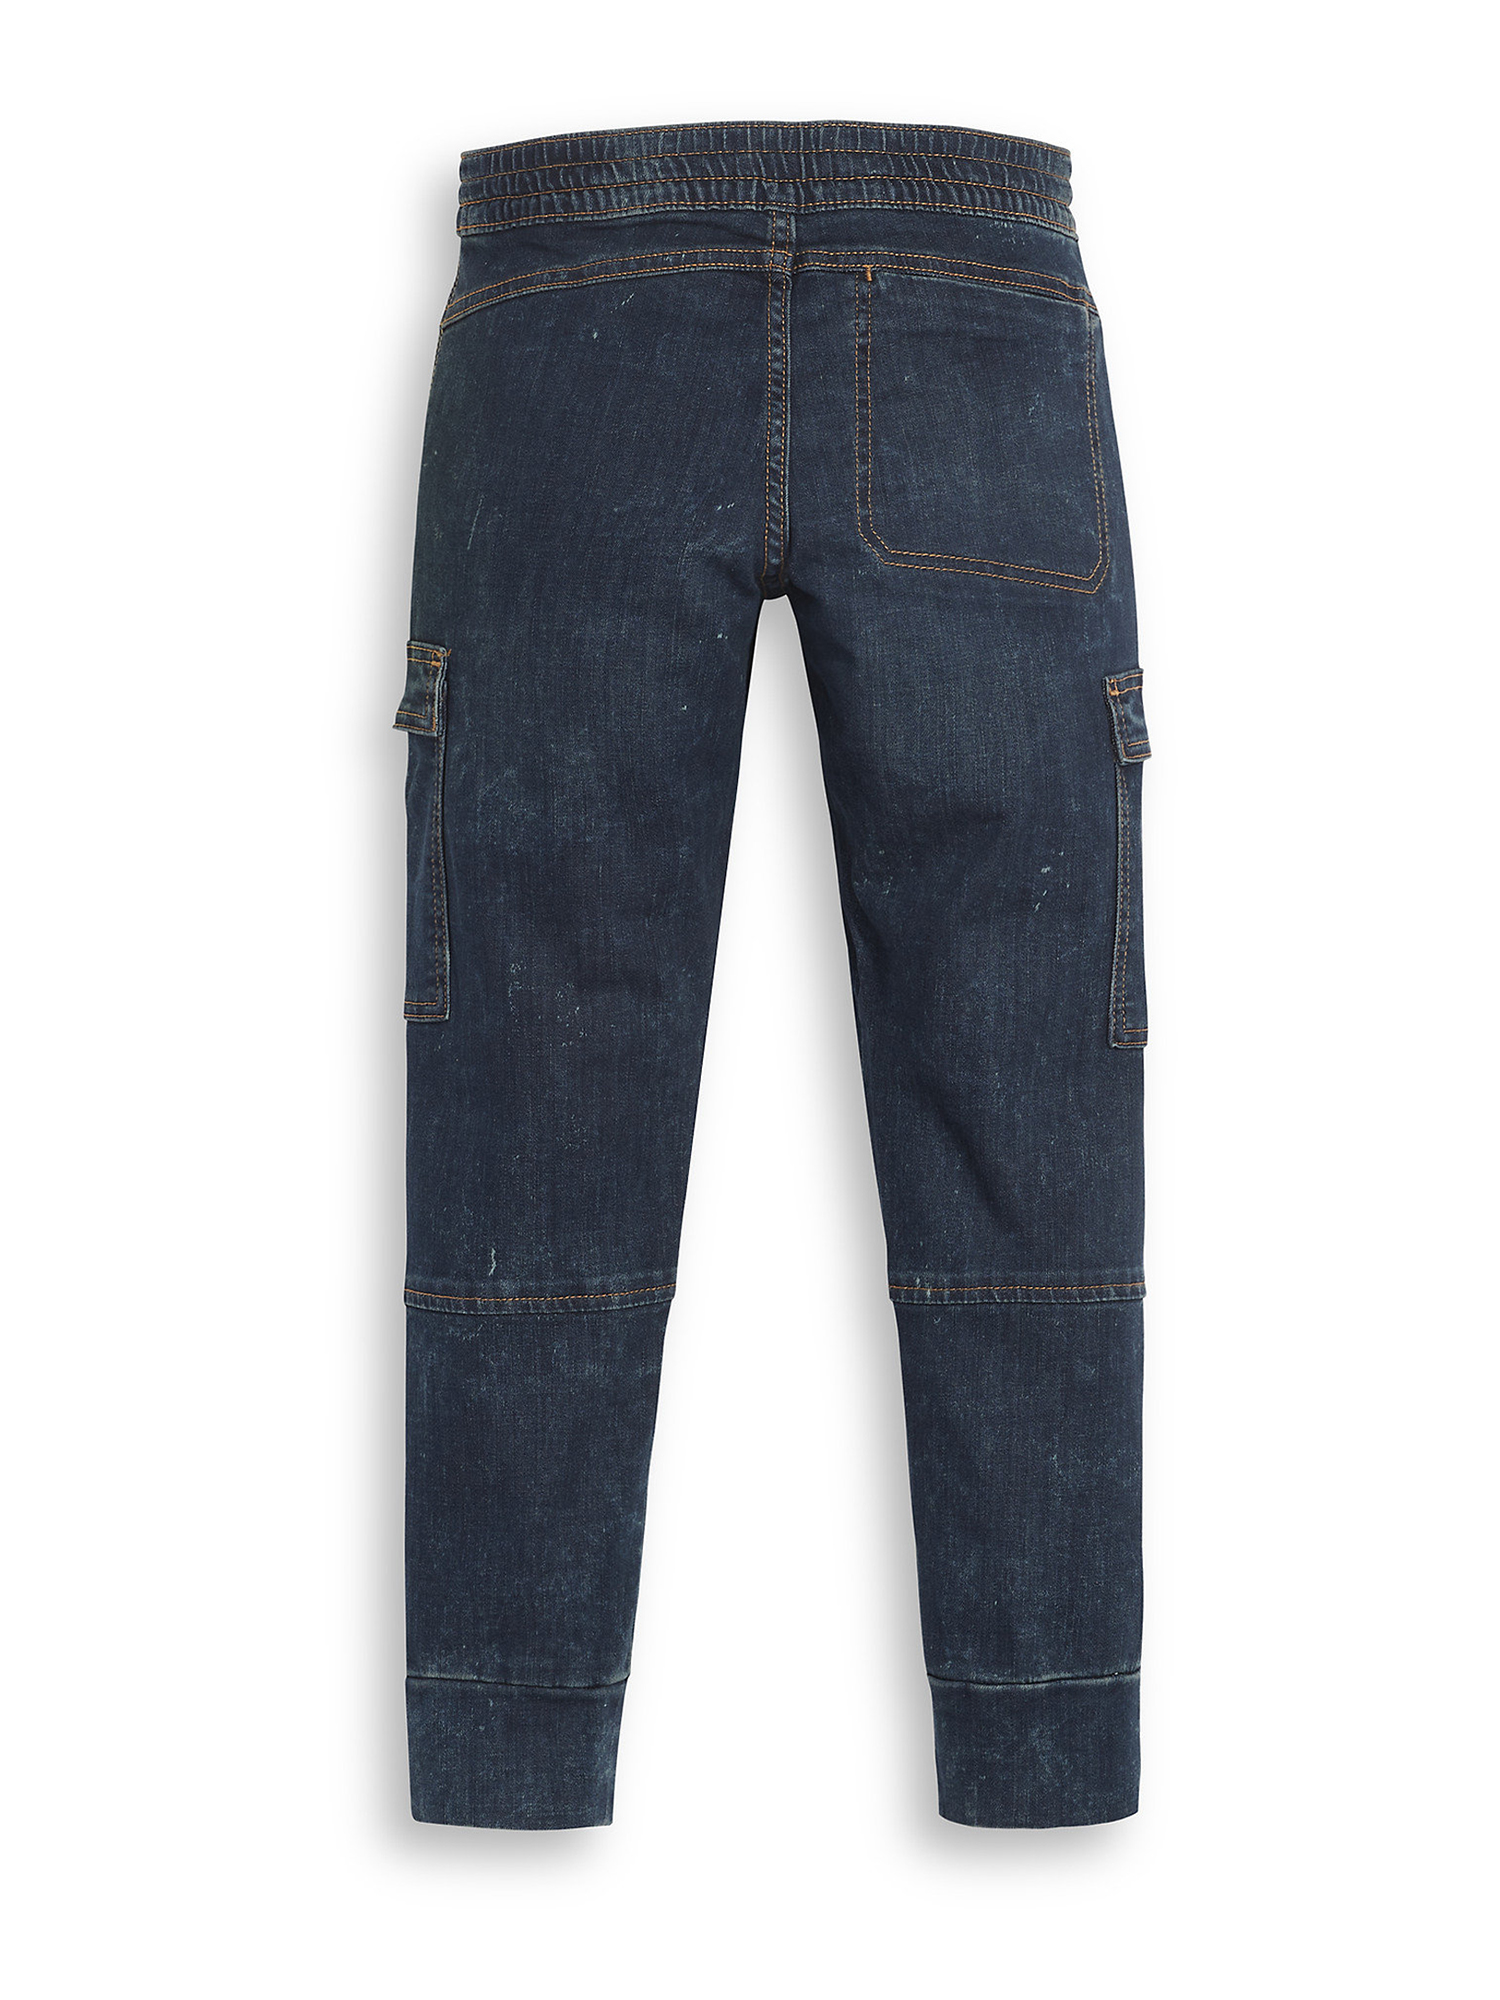 Signature by Levi Strauss & Co. Boys' Cargo Jogger Pants, Sizes 4-18 - image 3 of 3